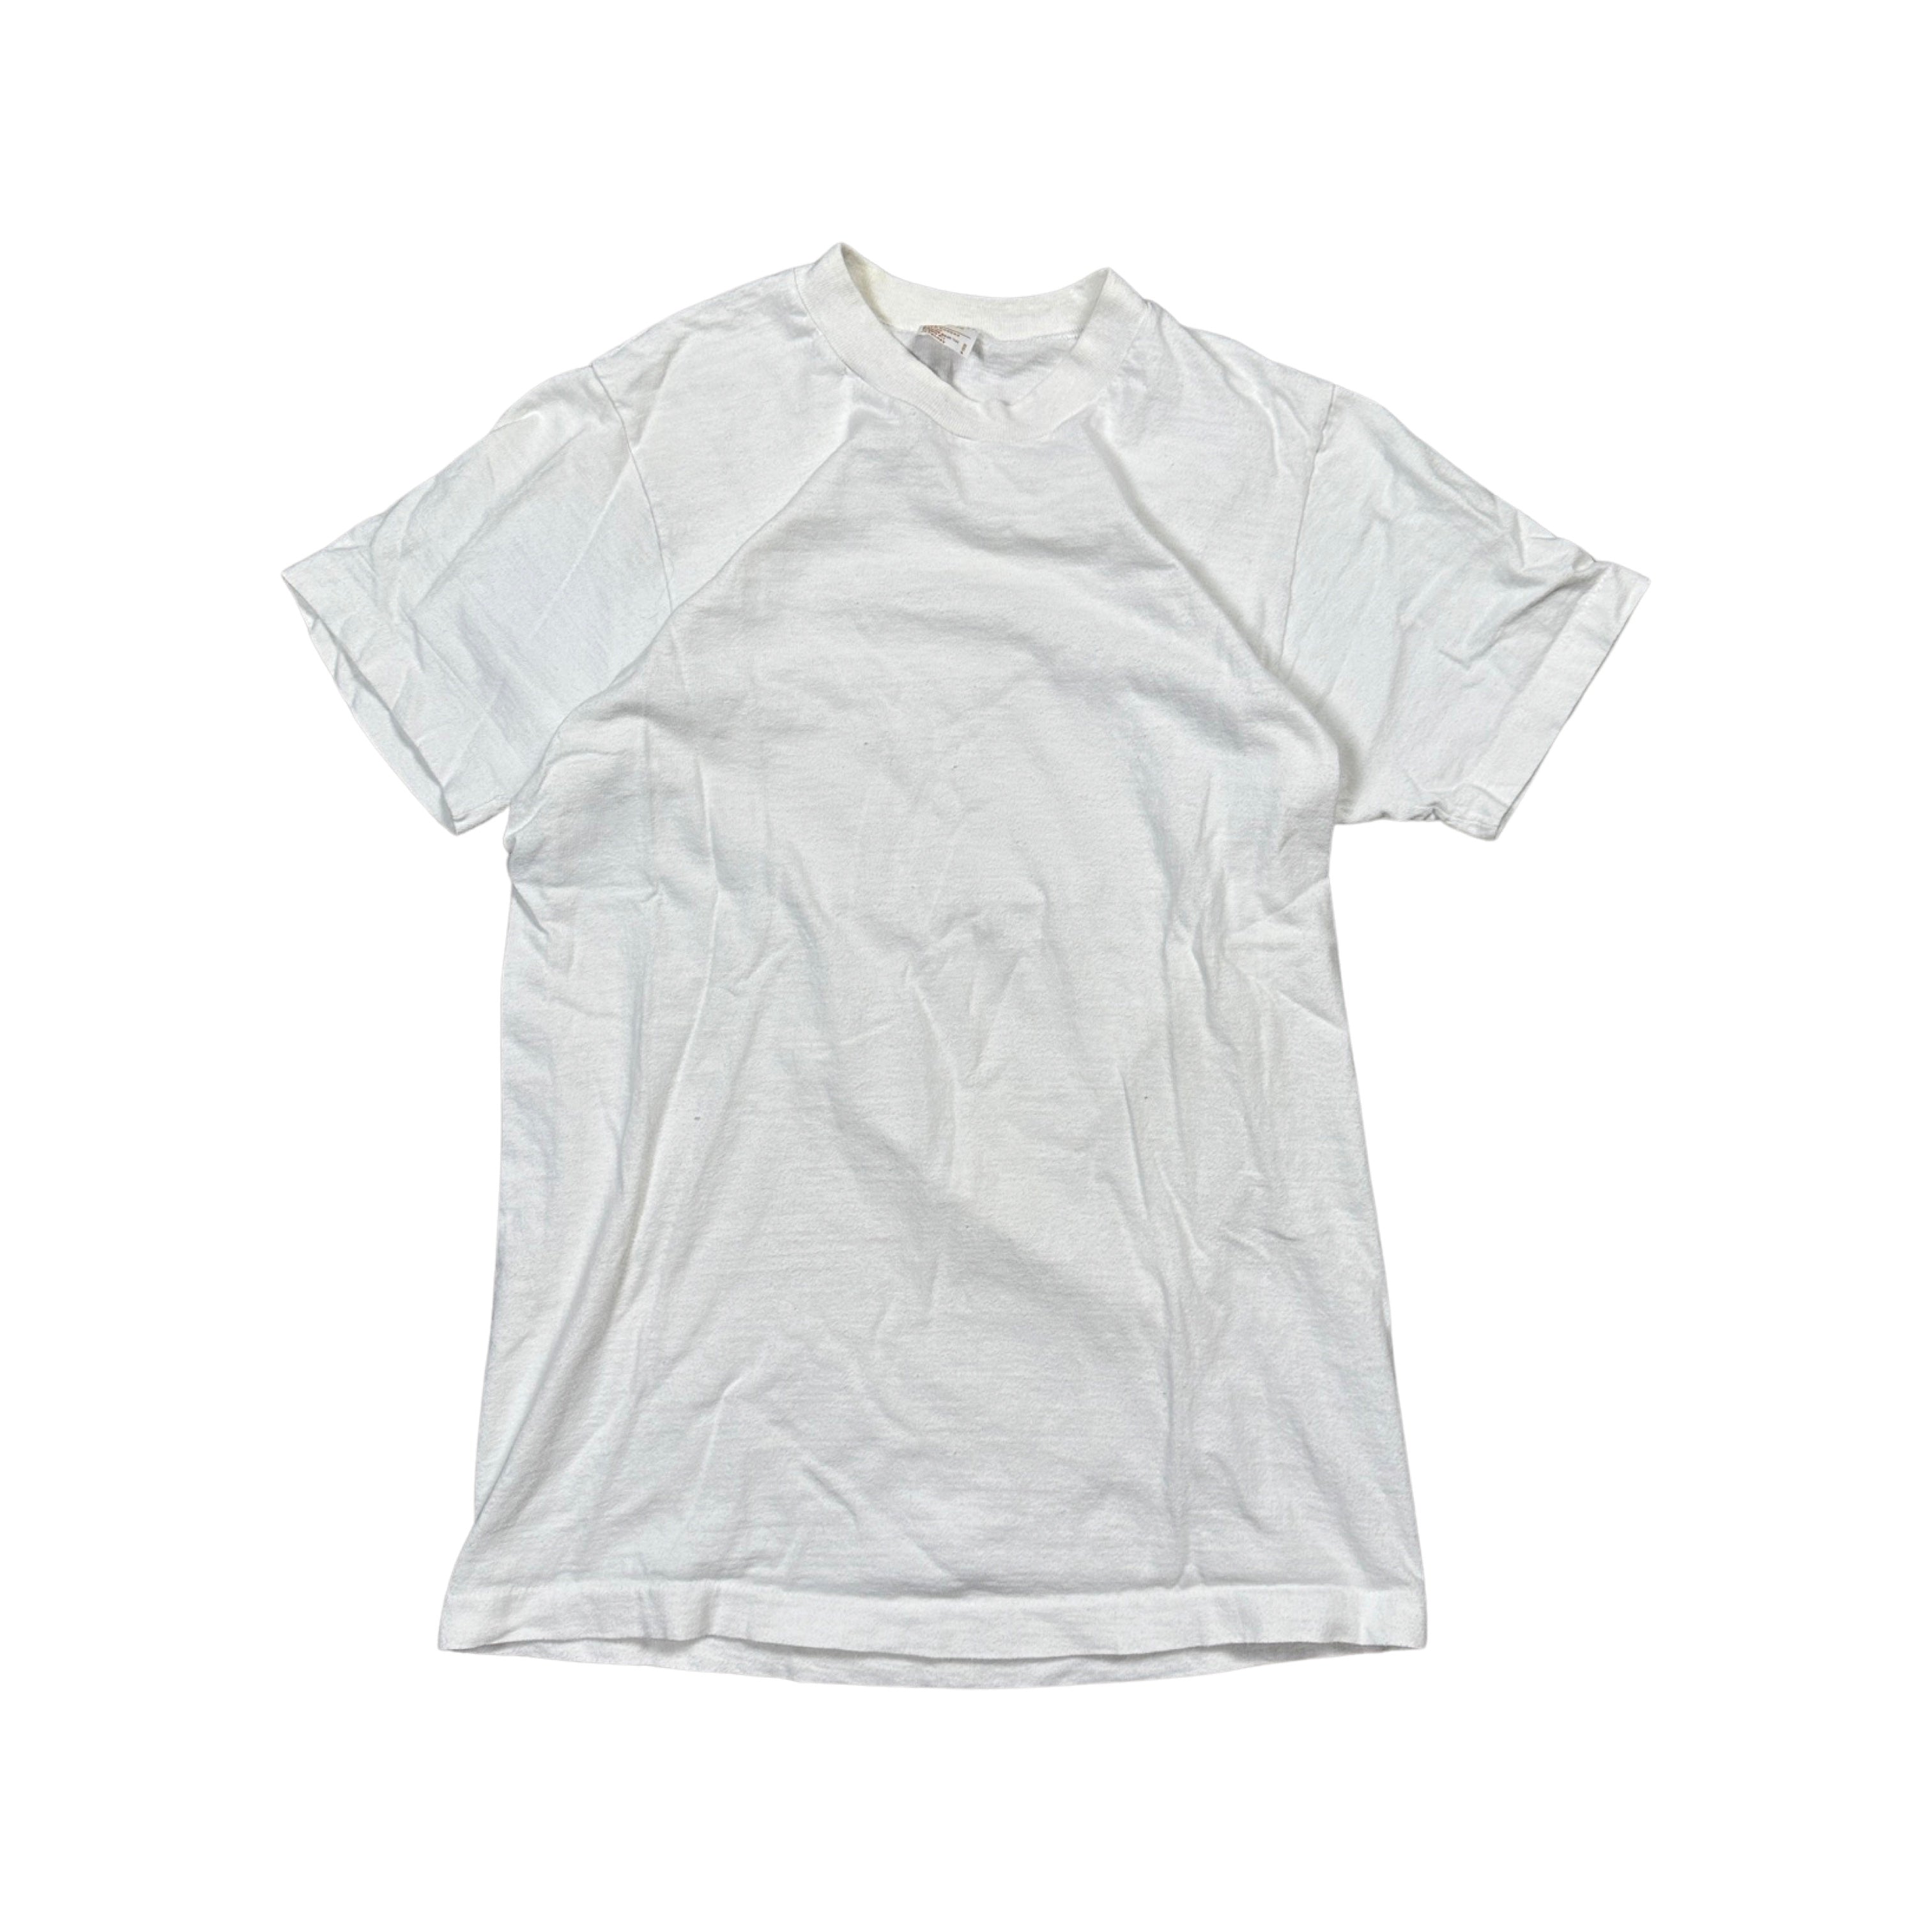 JCPenney 60/70s White Blank T-Shirt Essential (Small)